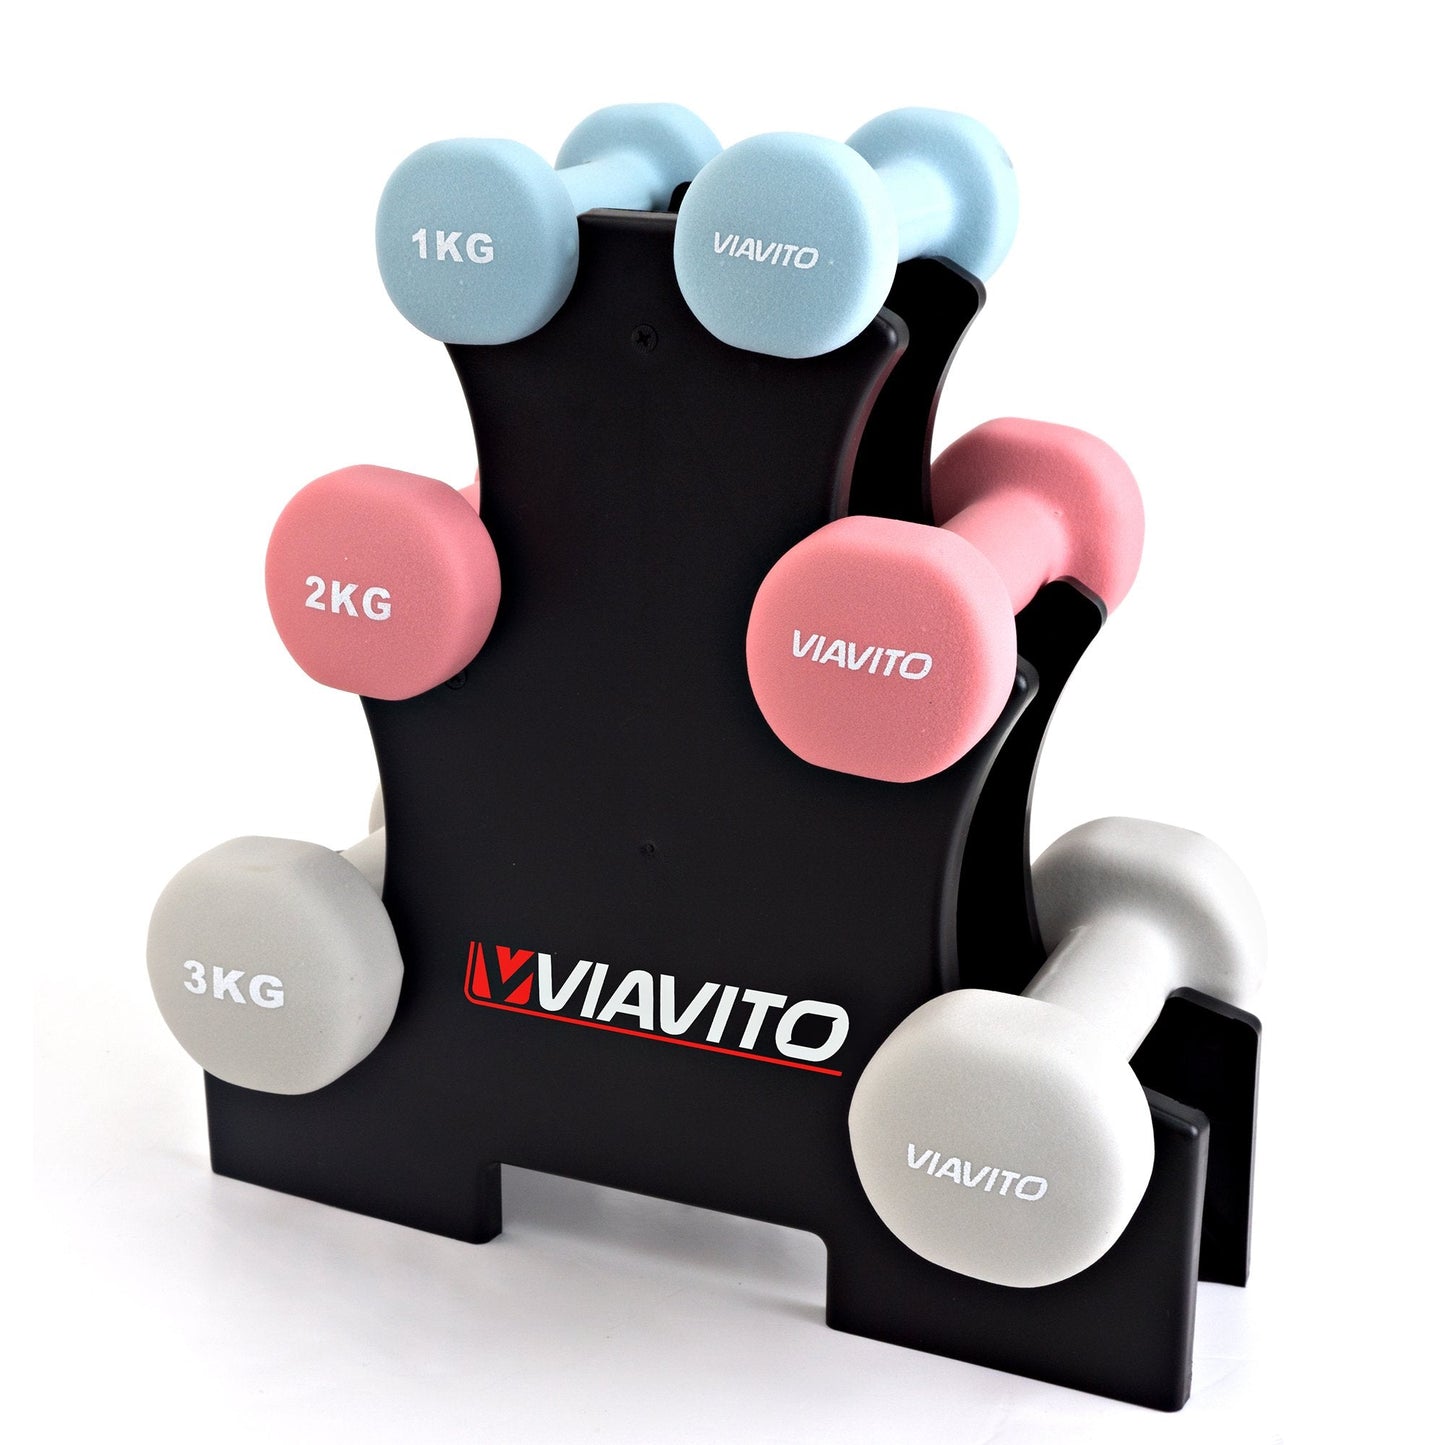 |Viavito 12kg Dumbbell Weights Set with Stand - Angle|